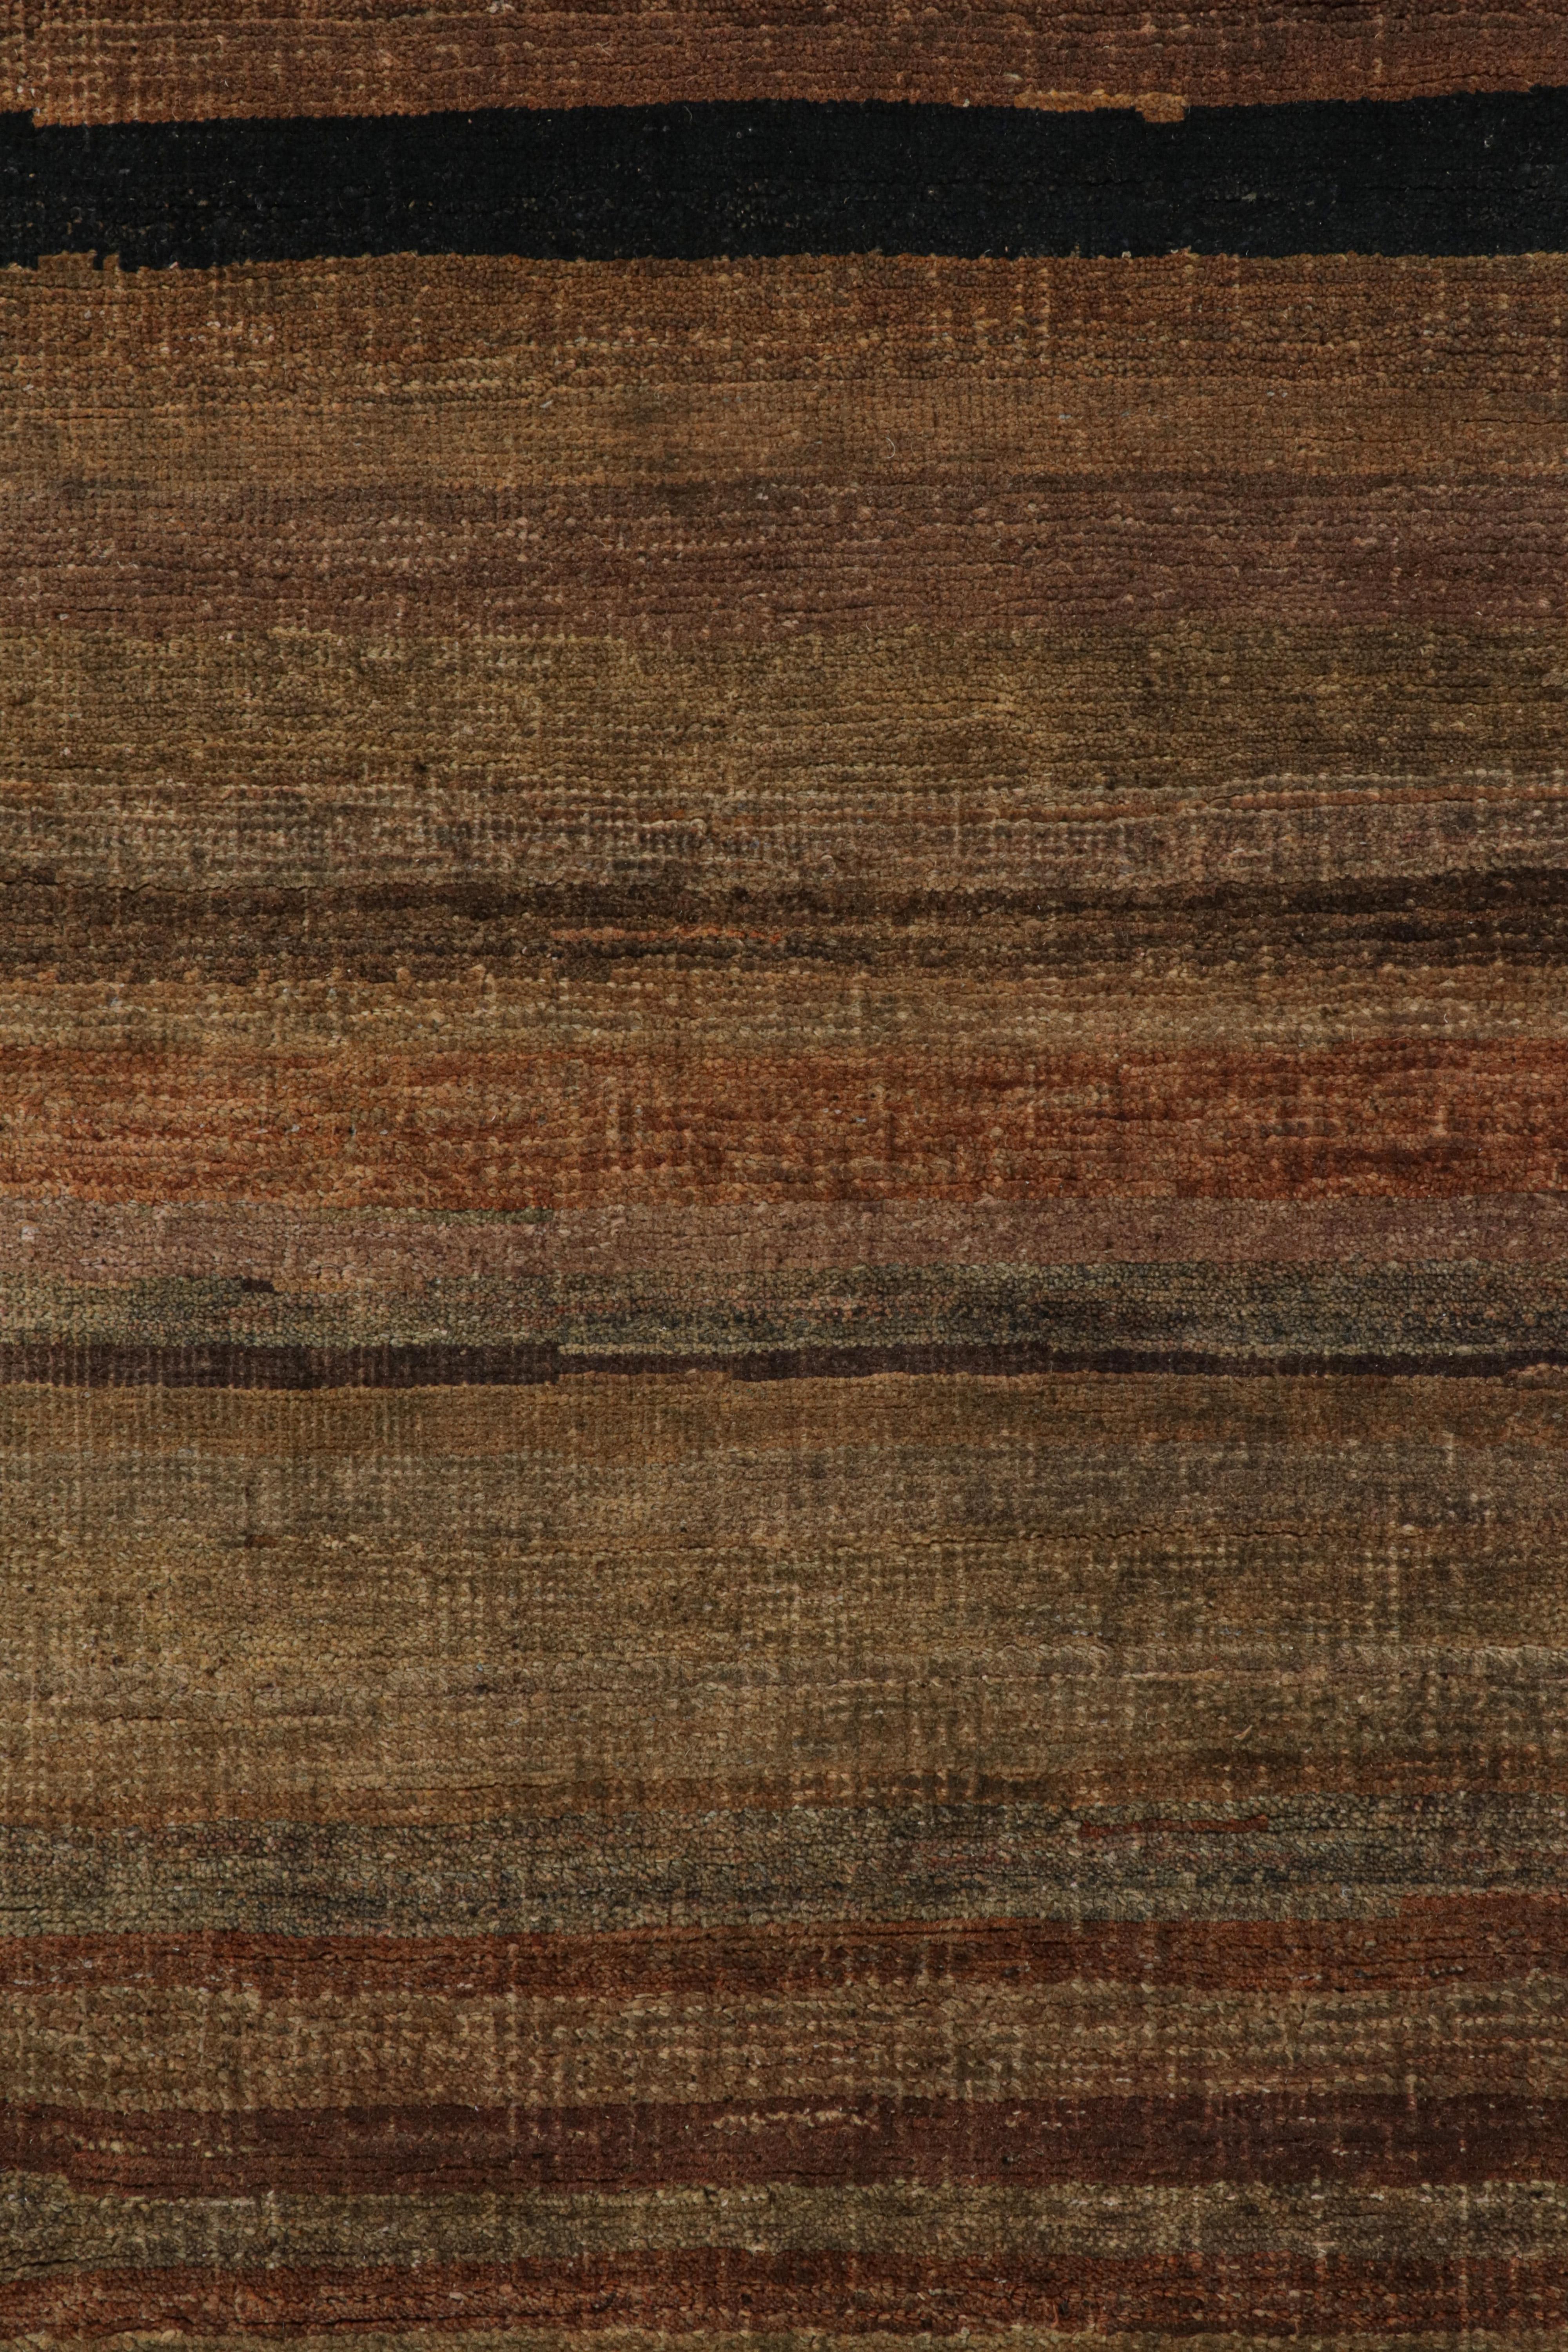 Indian Rug & Kilim’s Modern Textural Rug in Rich Browns and Umber Stripes and Striae For Sale